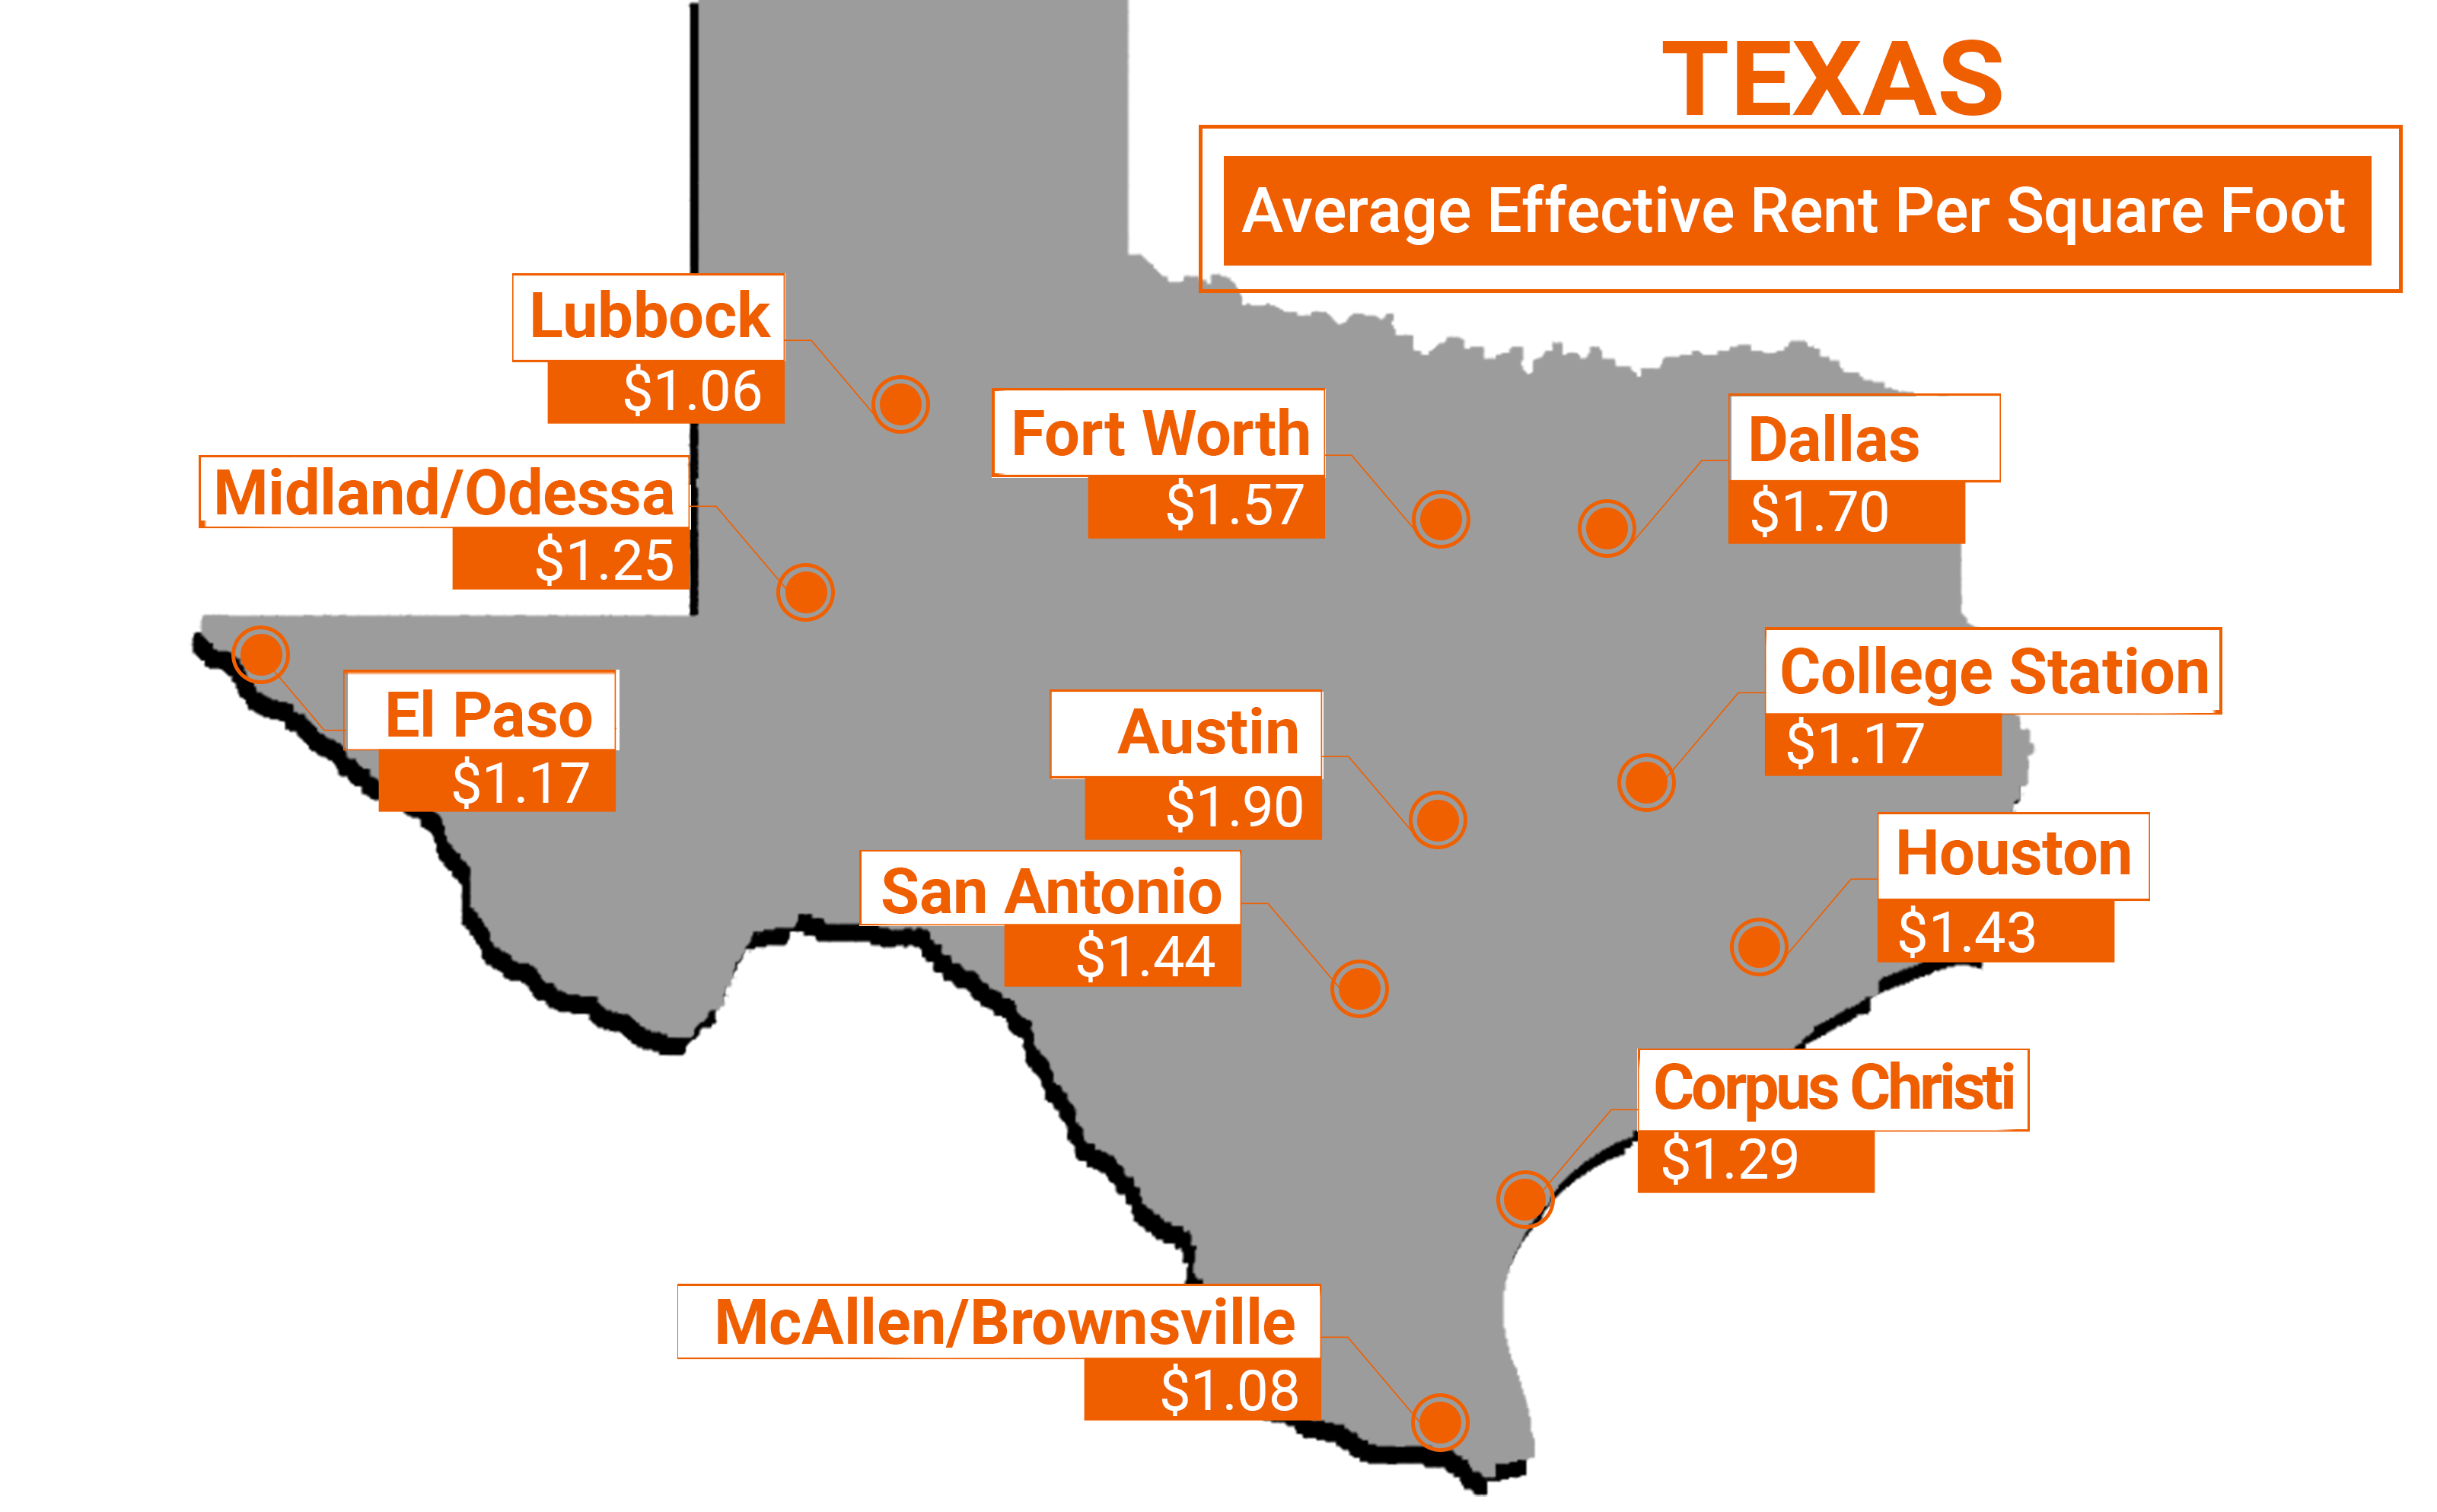 Texas Apartment Markets Ranked by Rent Per Square Foot